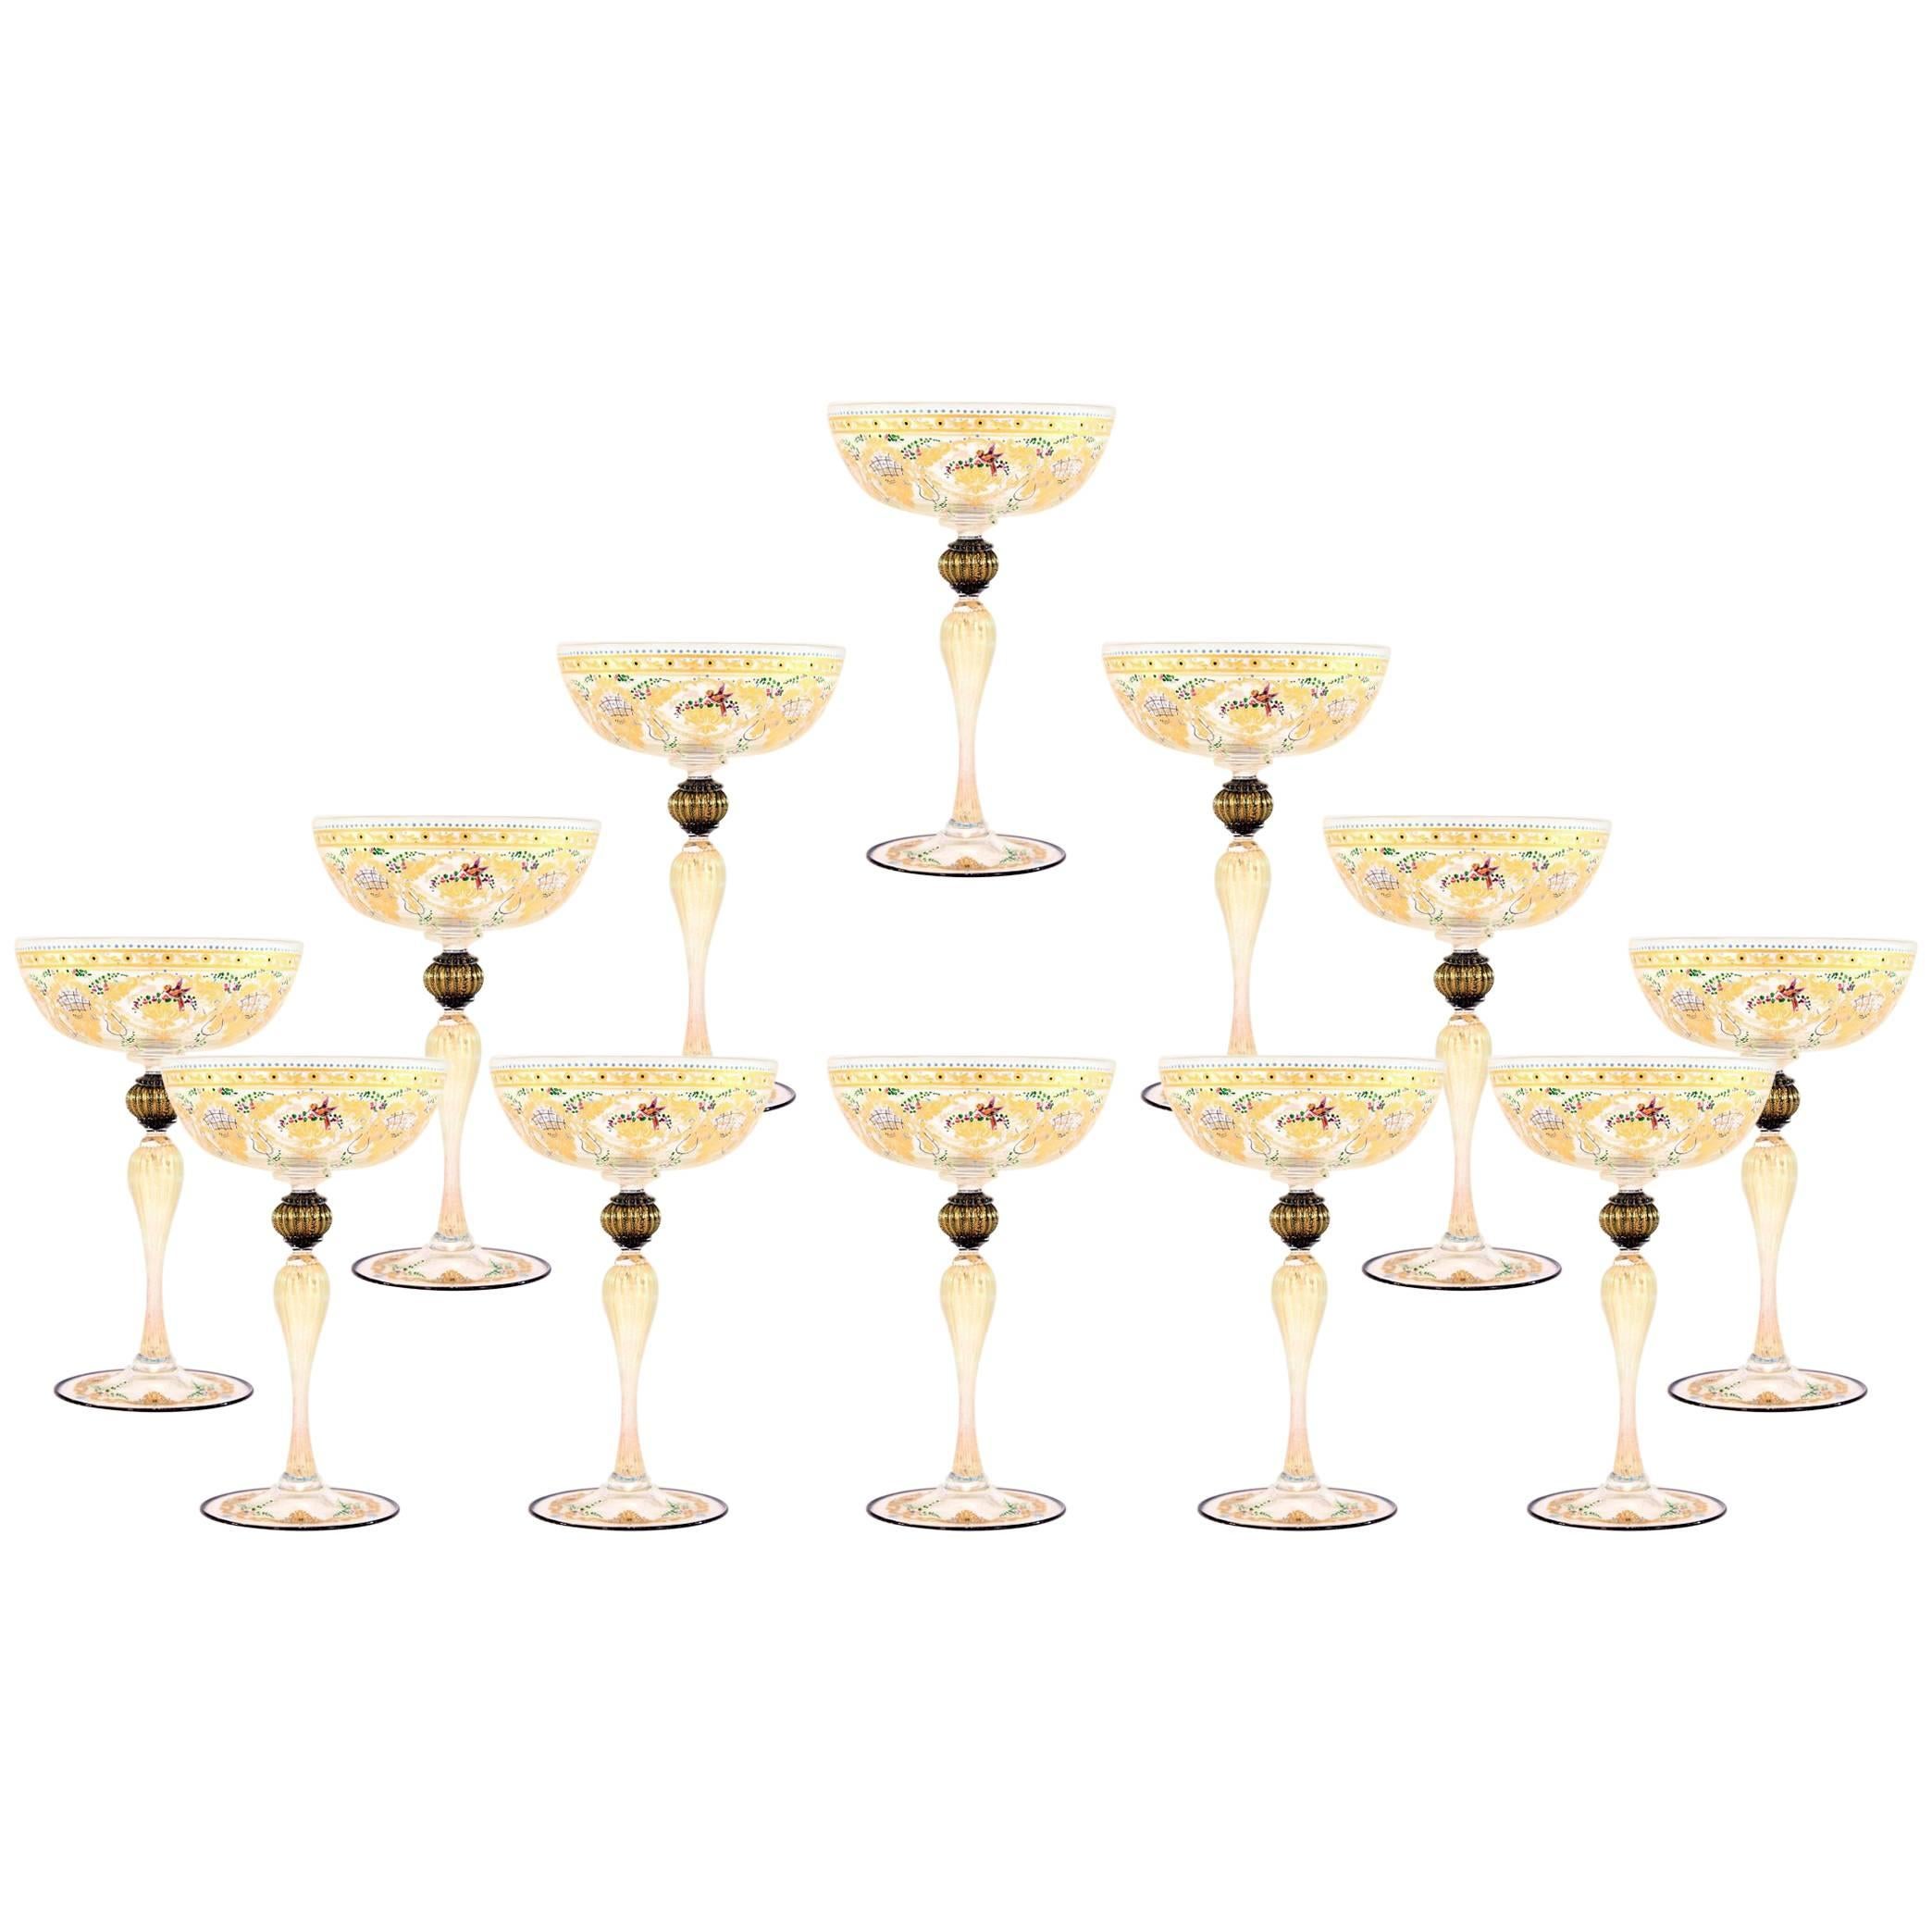 12 Handblown Venetian Salviati Hand-Painted Gold Champagne Coupes with Birds